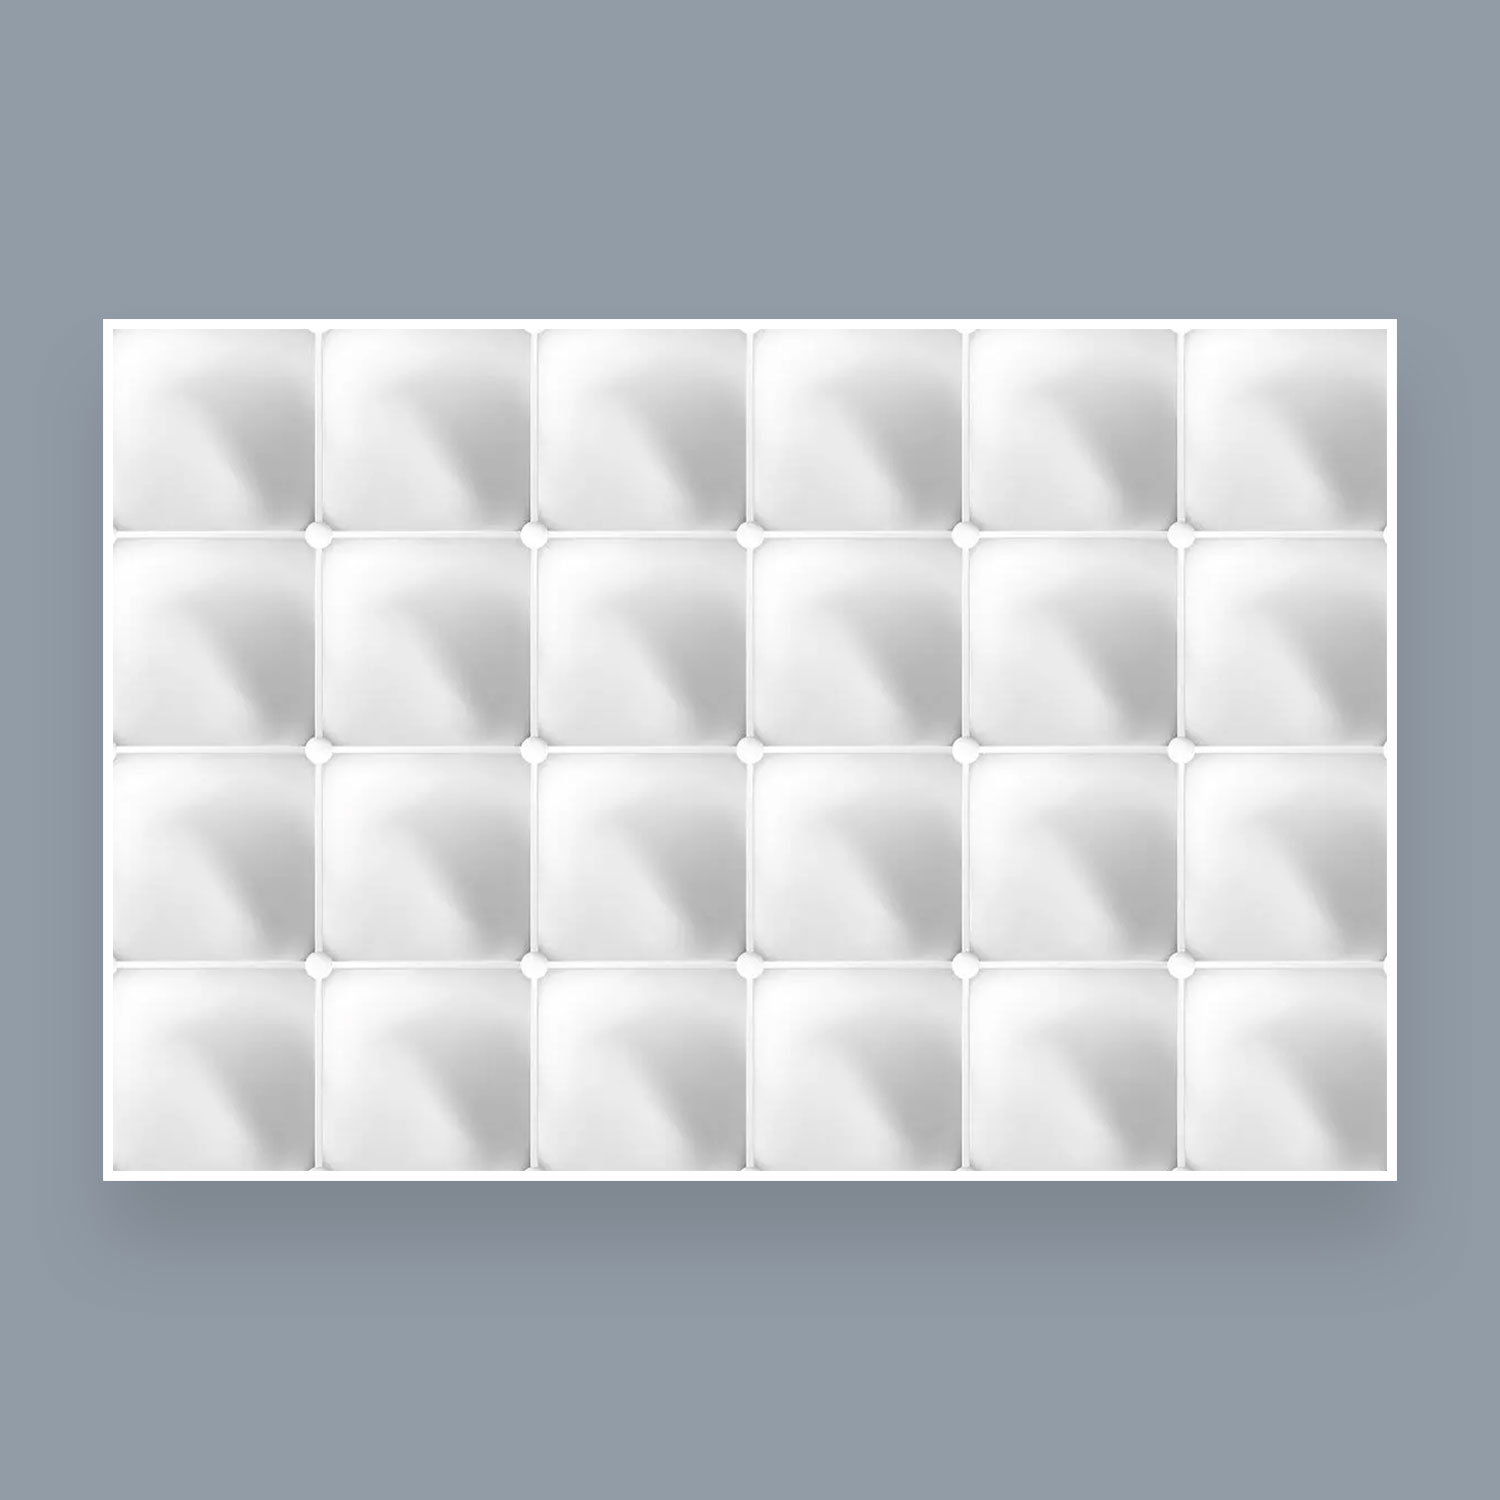 White soft seamless texture in the form of squares on a gray background.